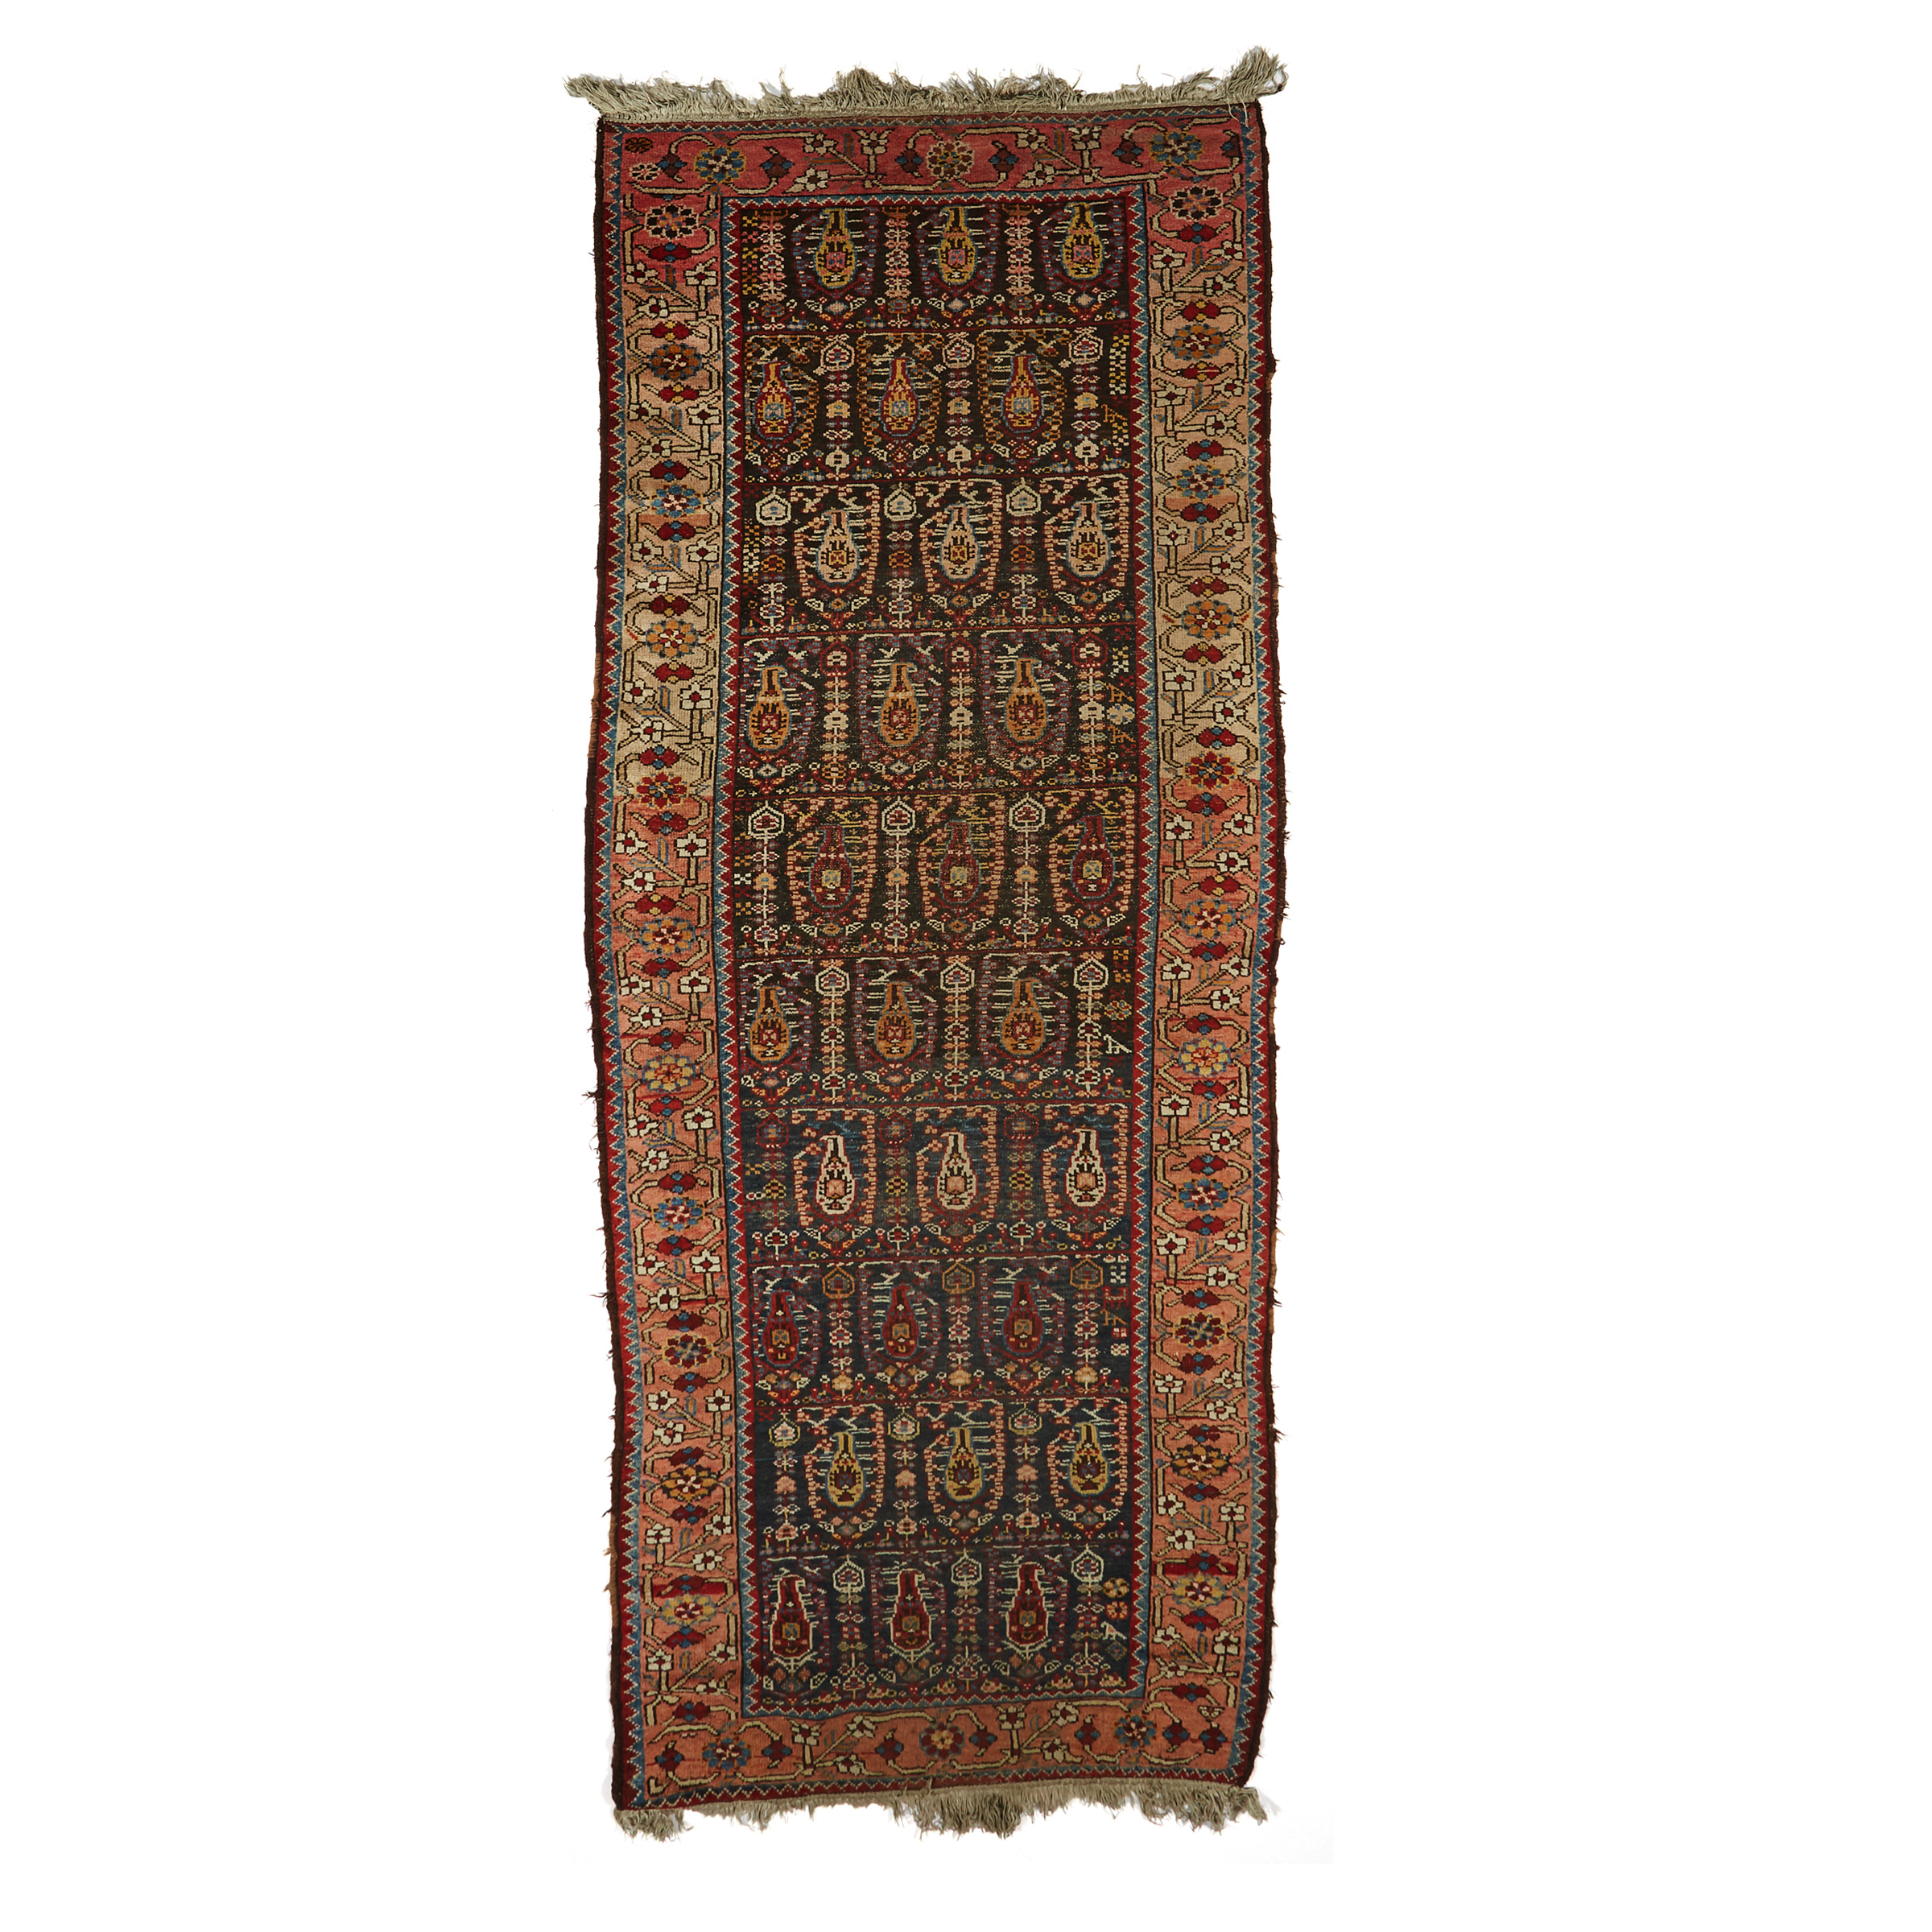 South Caucasian Long Rug, late 19th century